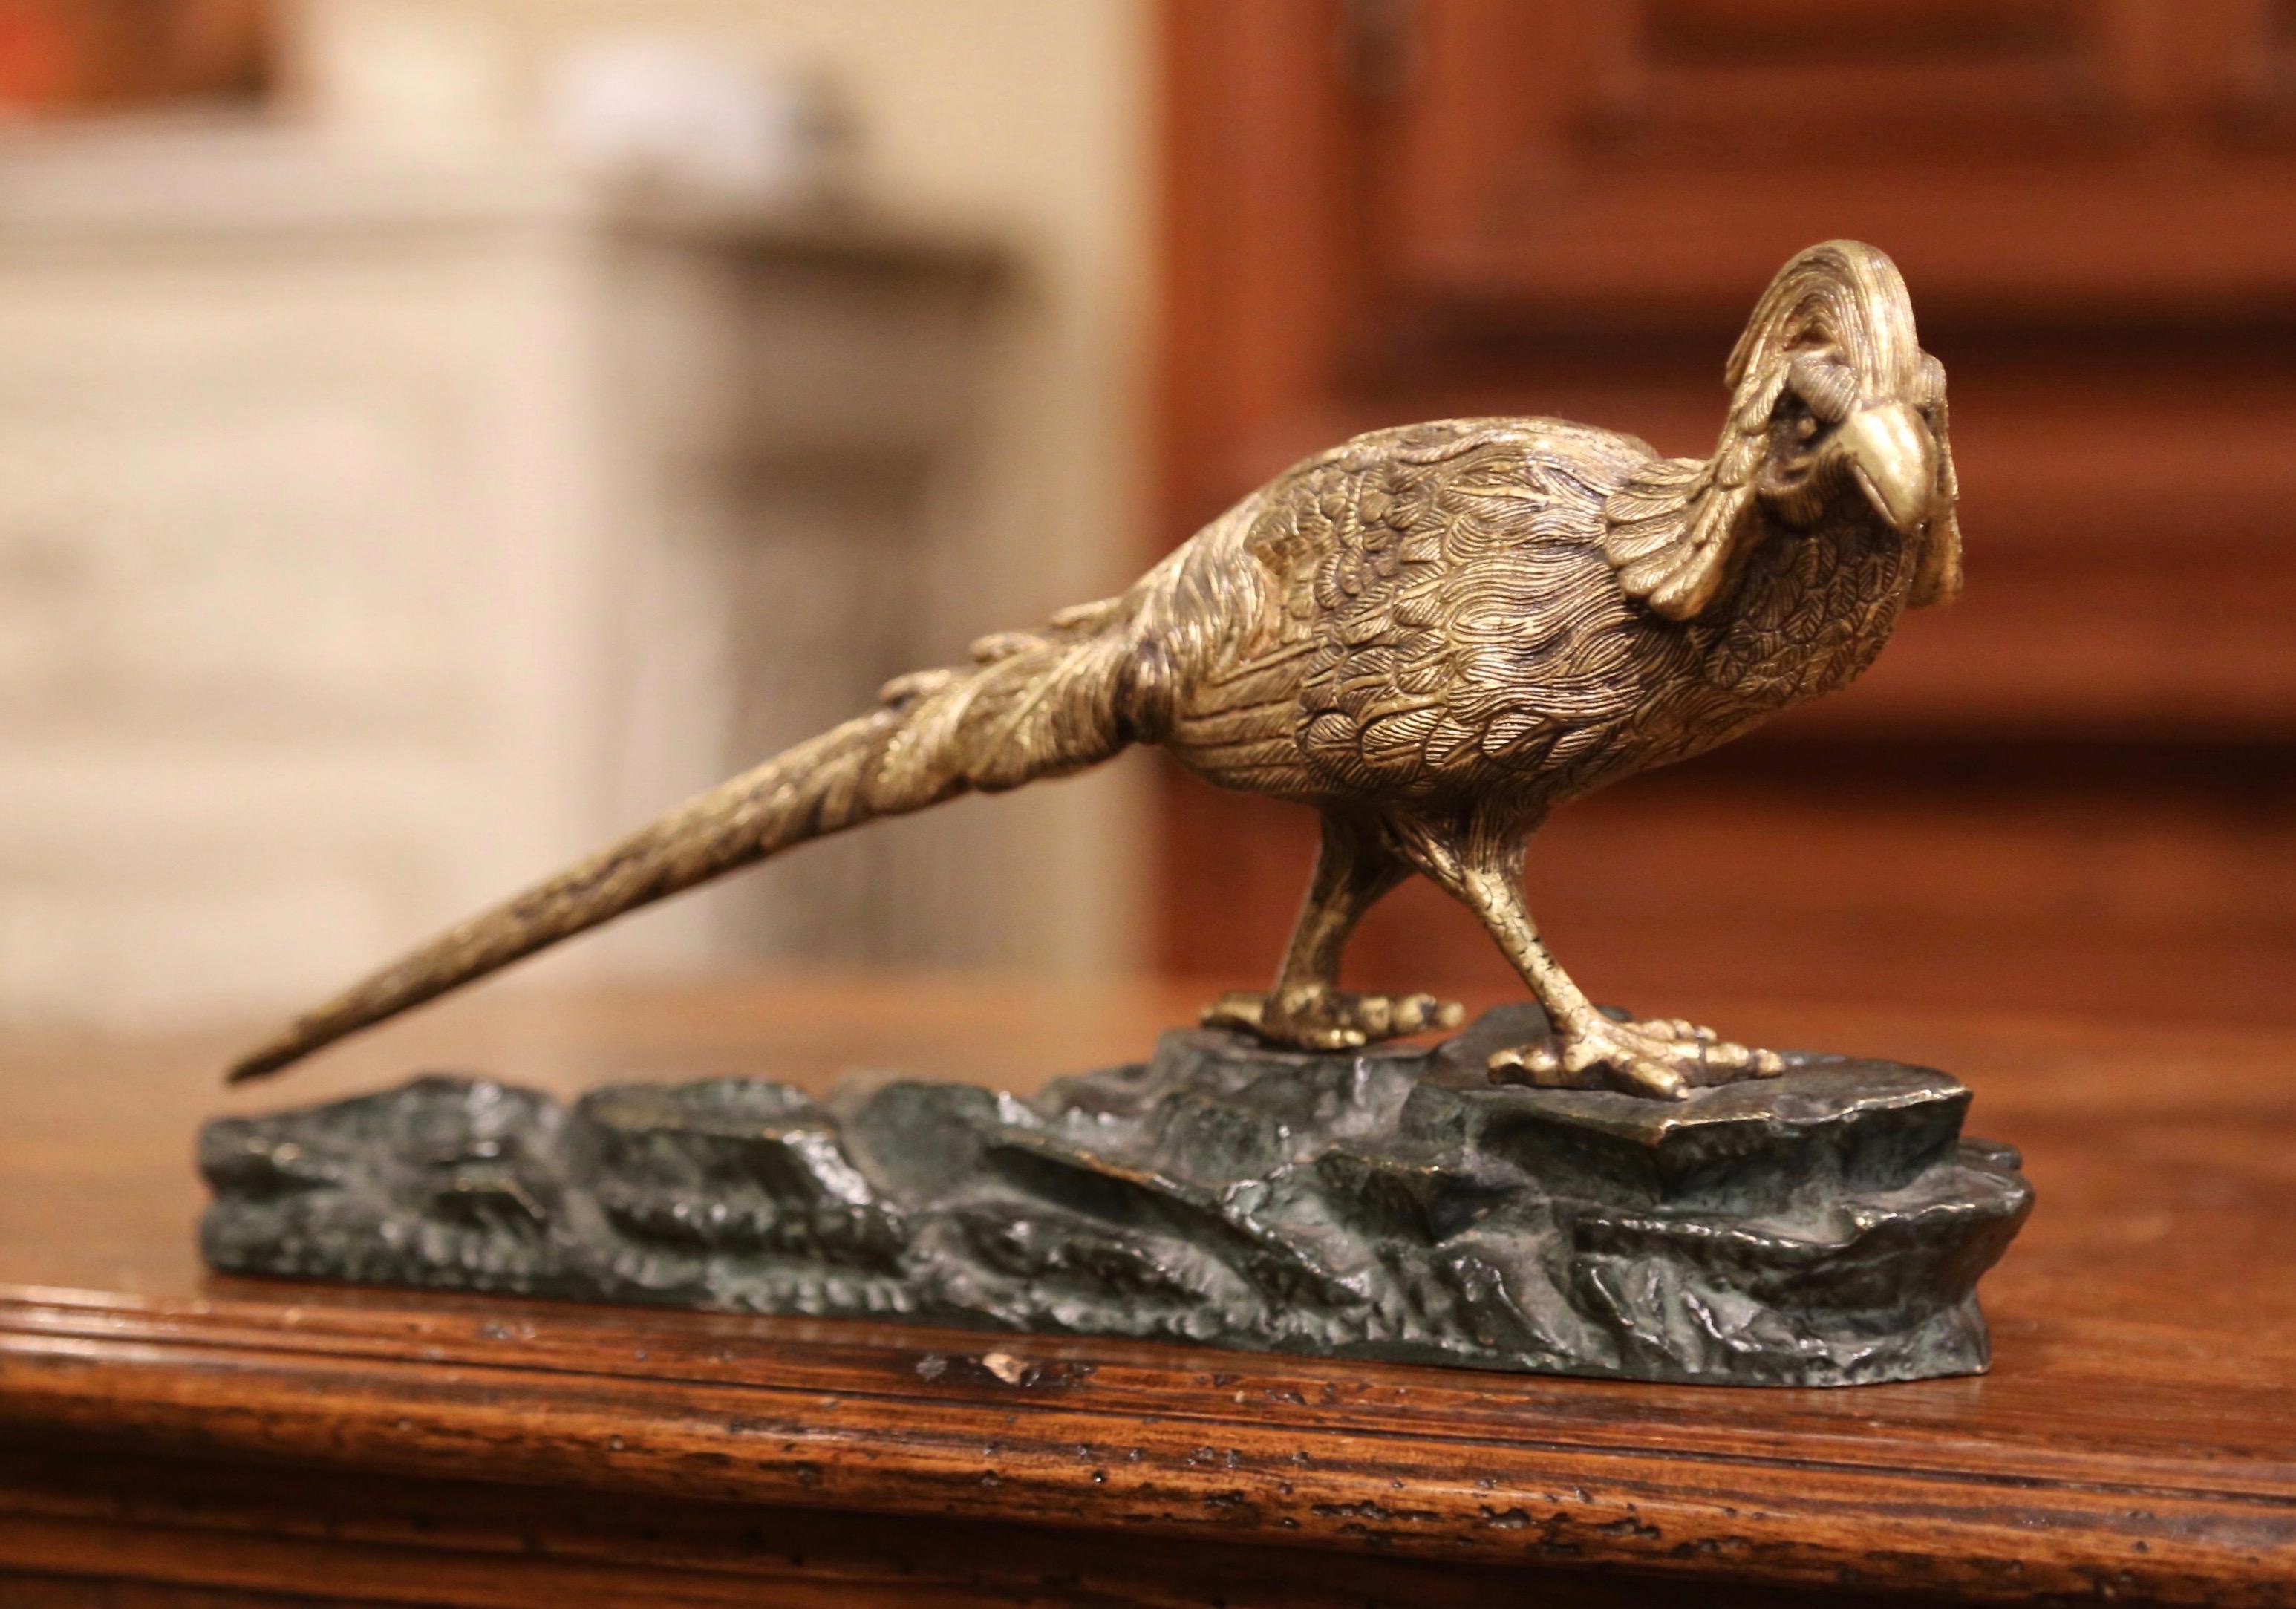 Accessorize a man's office or desk with this elegant antique bronze figure. Crafted in France circa 1950, the sculpture features a pheasant with long tail standing on rocky grounds. The bird figure is in excellent condition with a two tone patinated